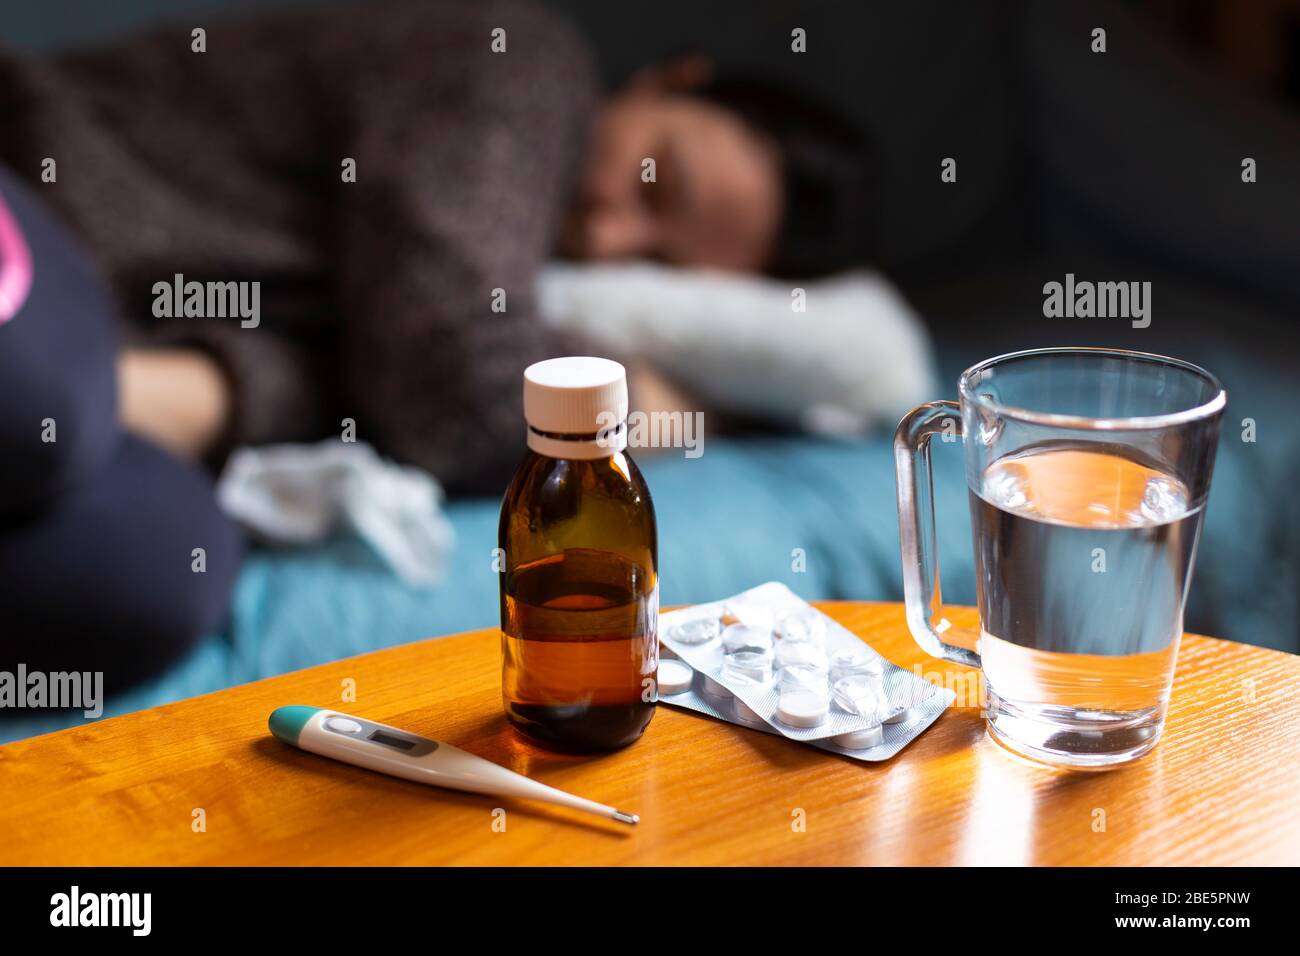 Woman feeling sick and have cramps lying on sofa and have some medicamentation on table Stock Photo